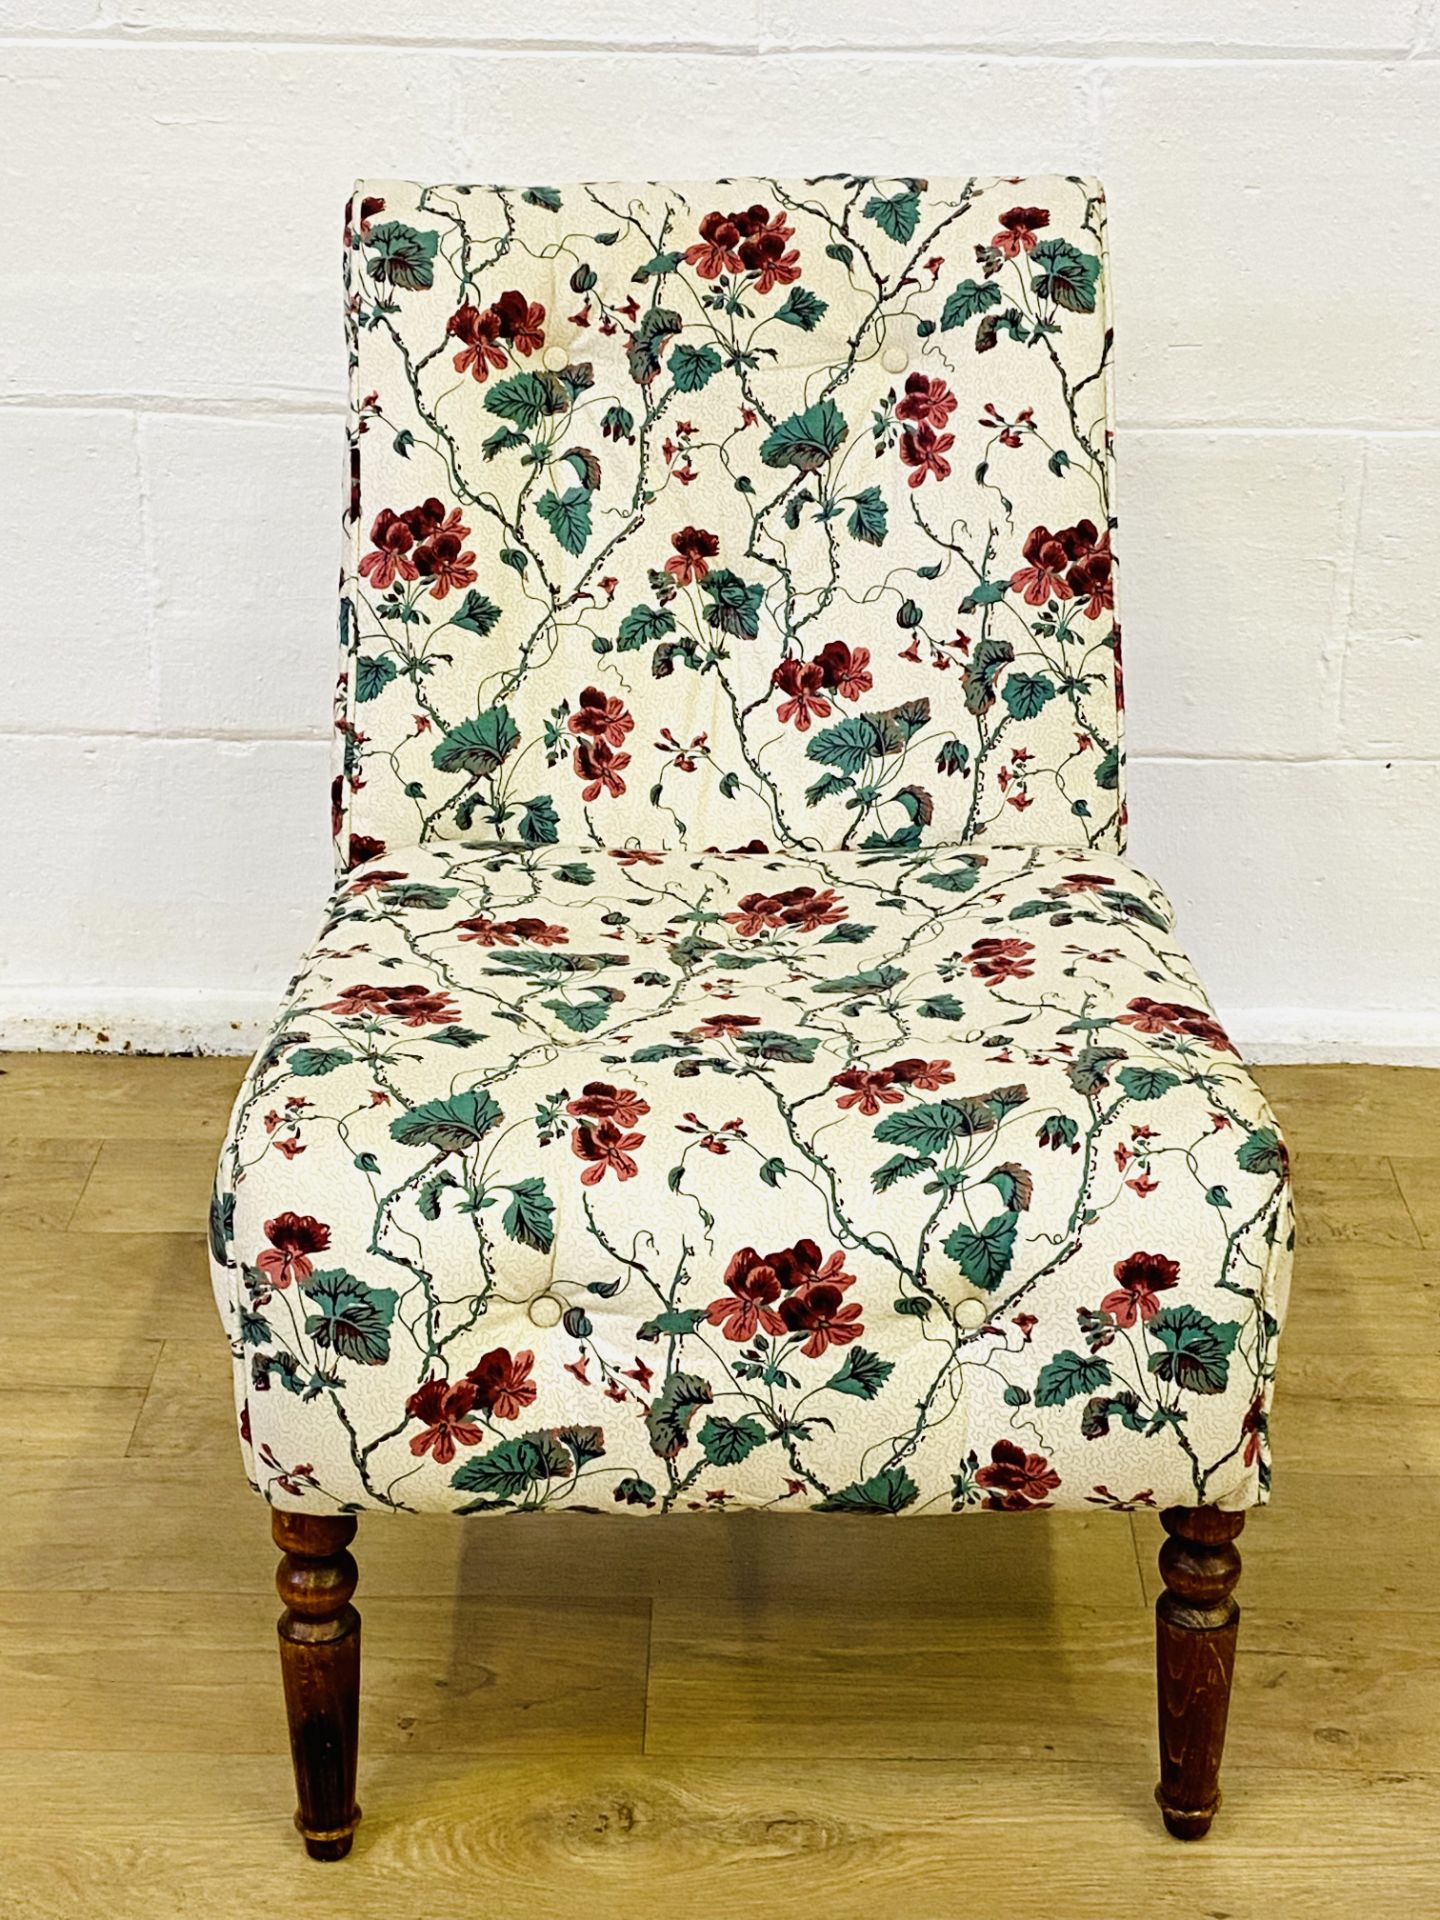 Floral fabric bedroom chair - Image 3 of 4